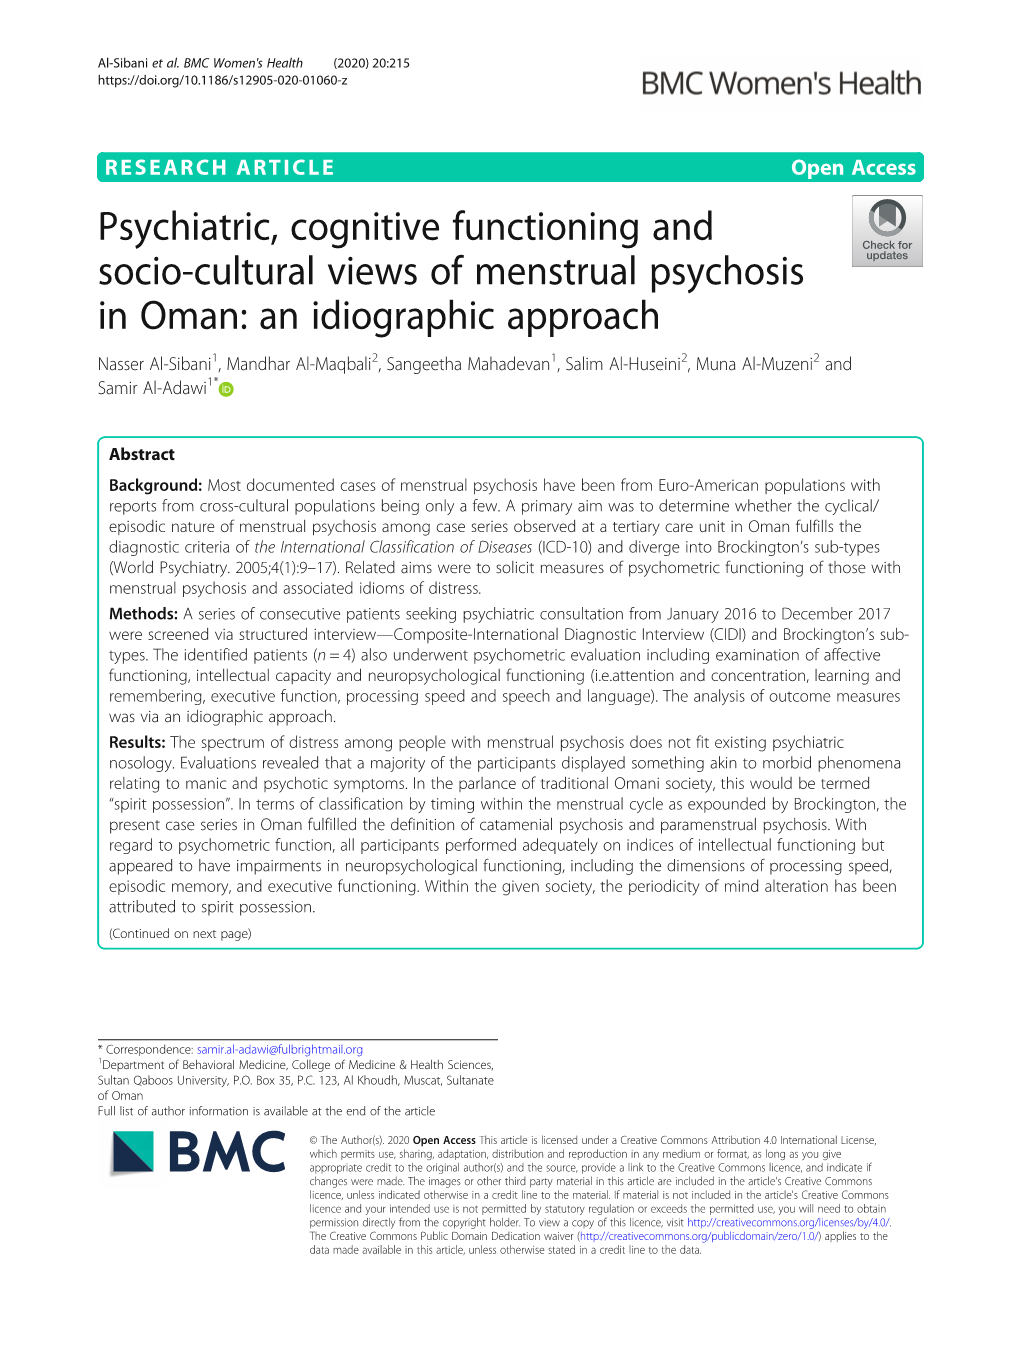 Psychiatric, Cognitive Functioning and Socio